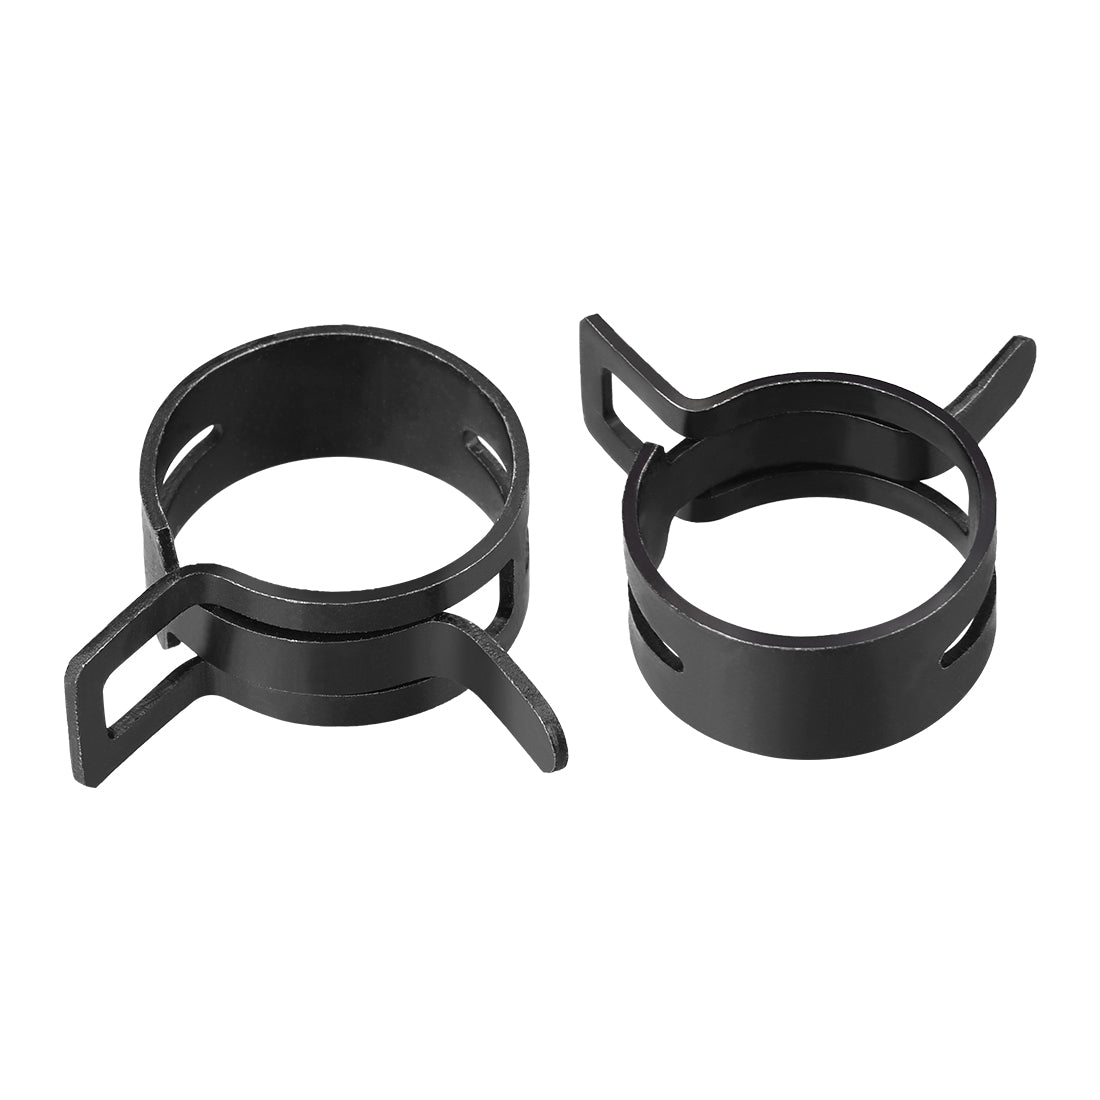 Uxcell Uxcell Steel Band Clamp 24mm for Fuel Line Silicone Hose Tube Spring Clips Clamp Black Manganese Steel 5Pcs